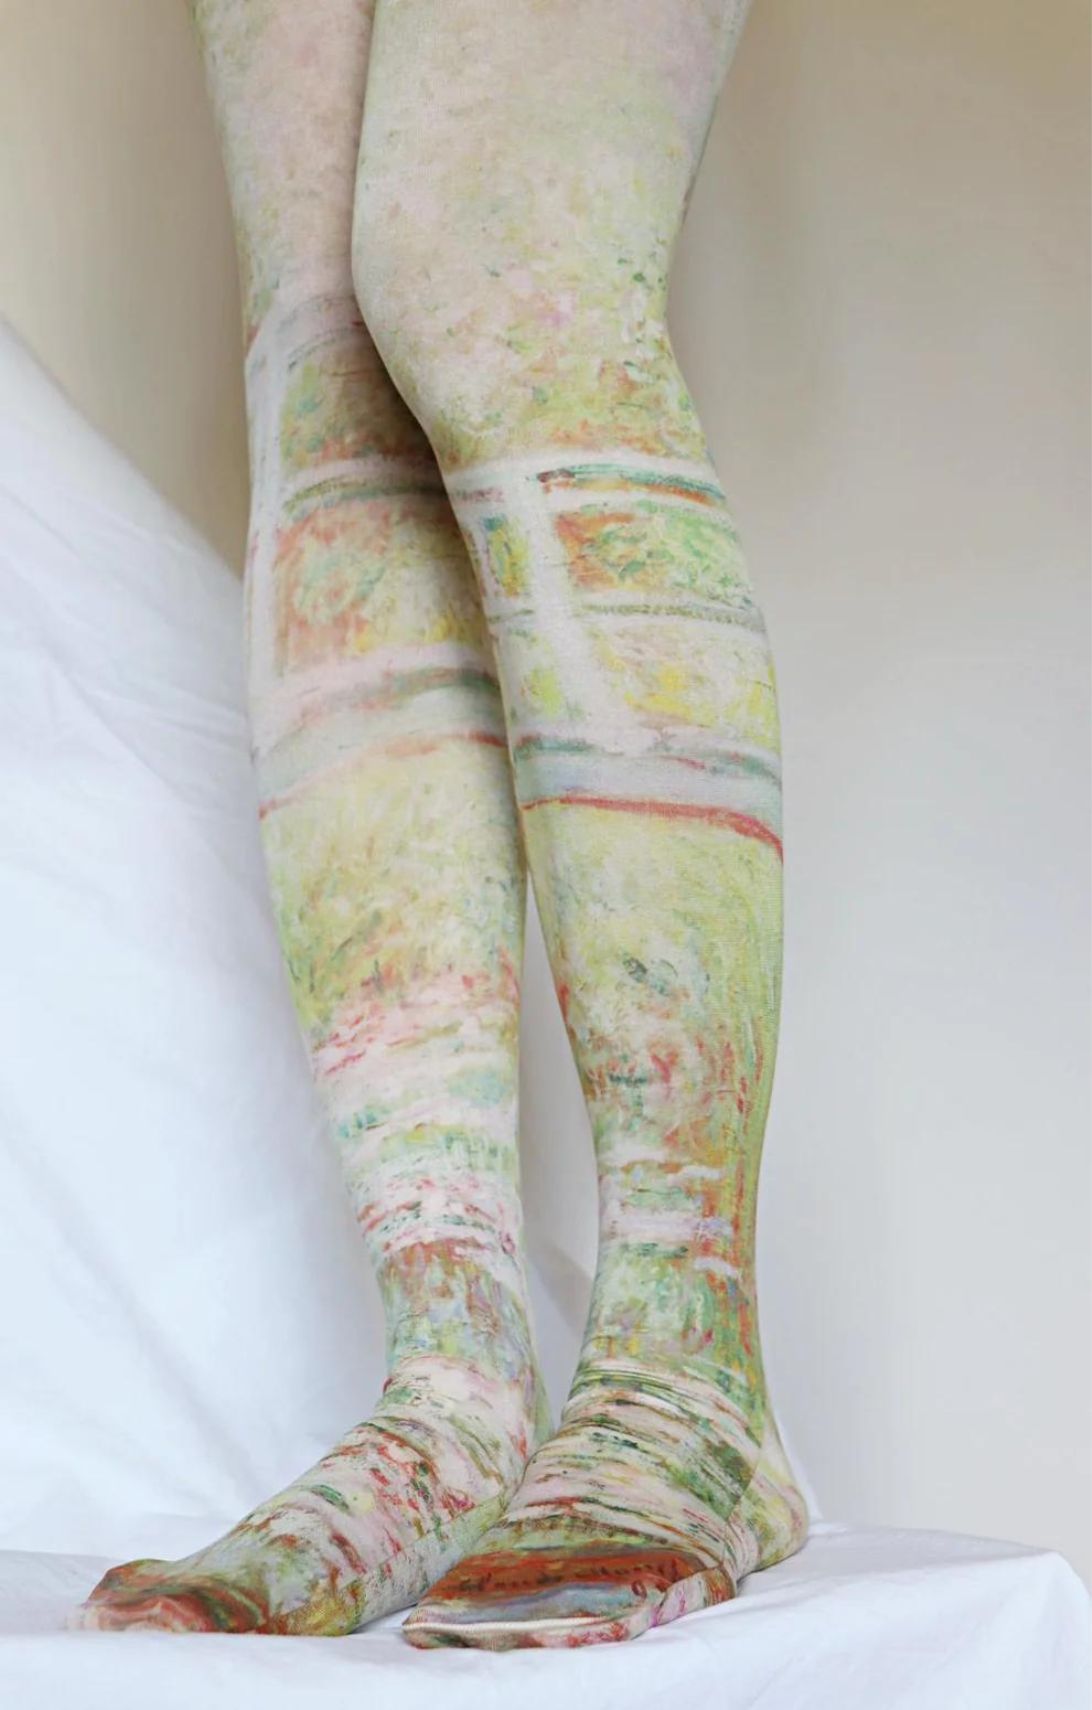 THE JAPANESE BRIDGE design of a product called Claude Monet Collection of the TABBISOCKS brand, overall color yellowish green